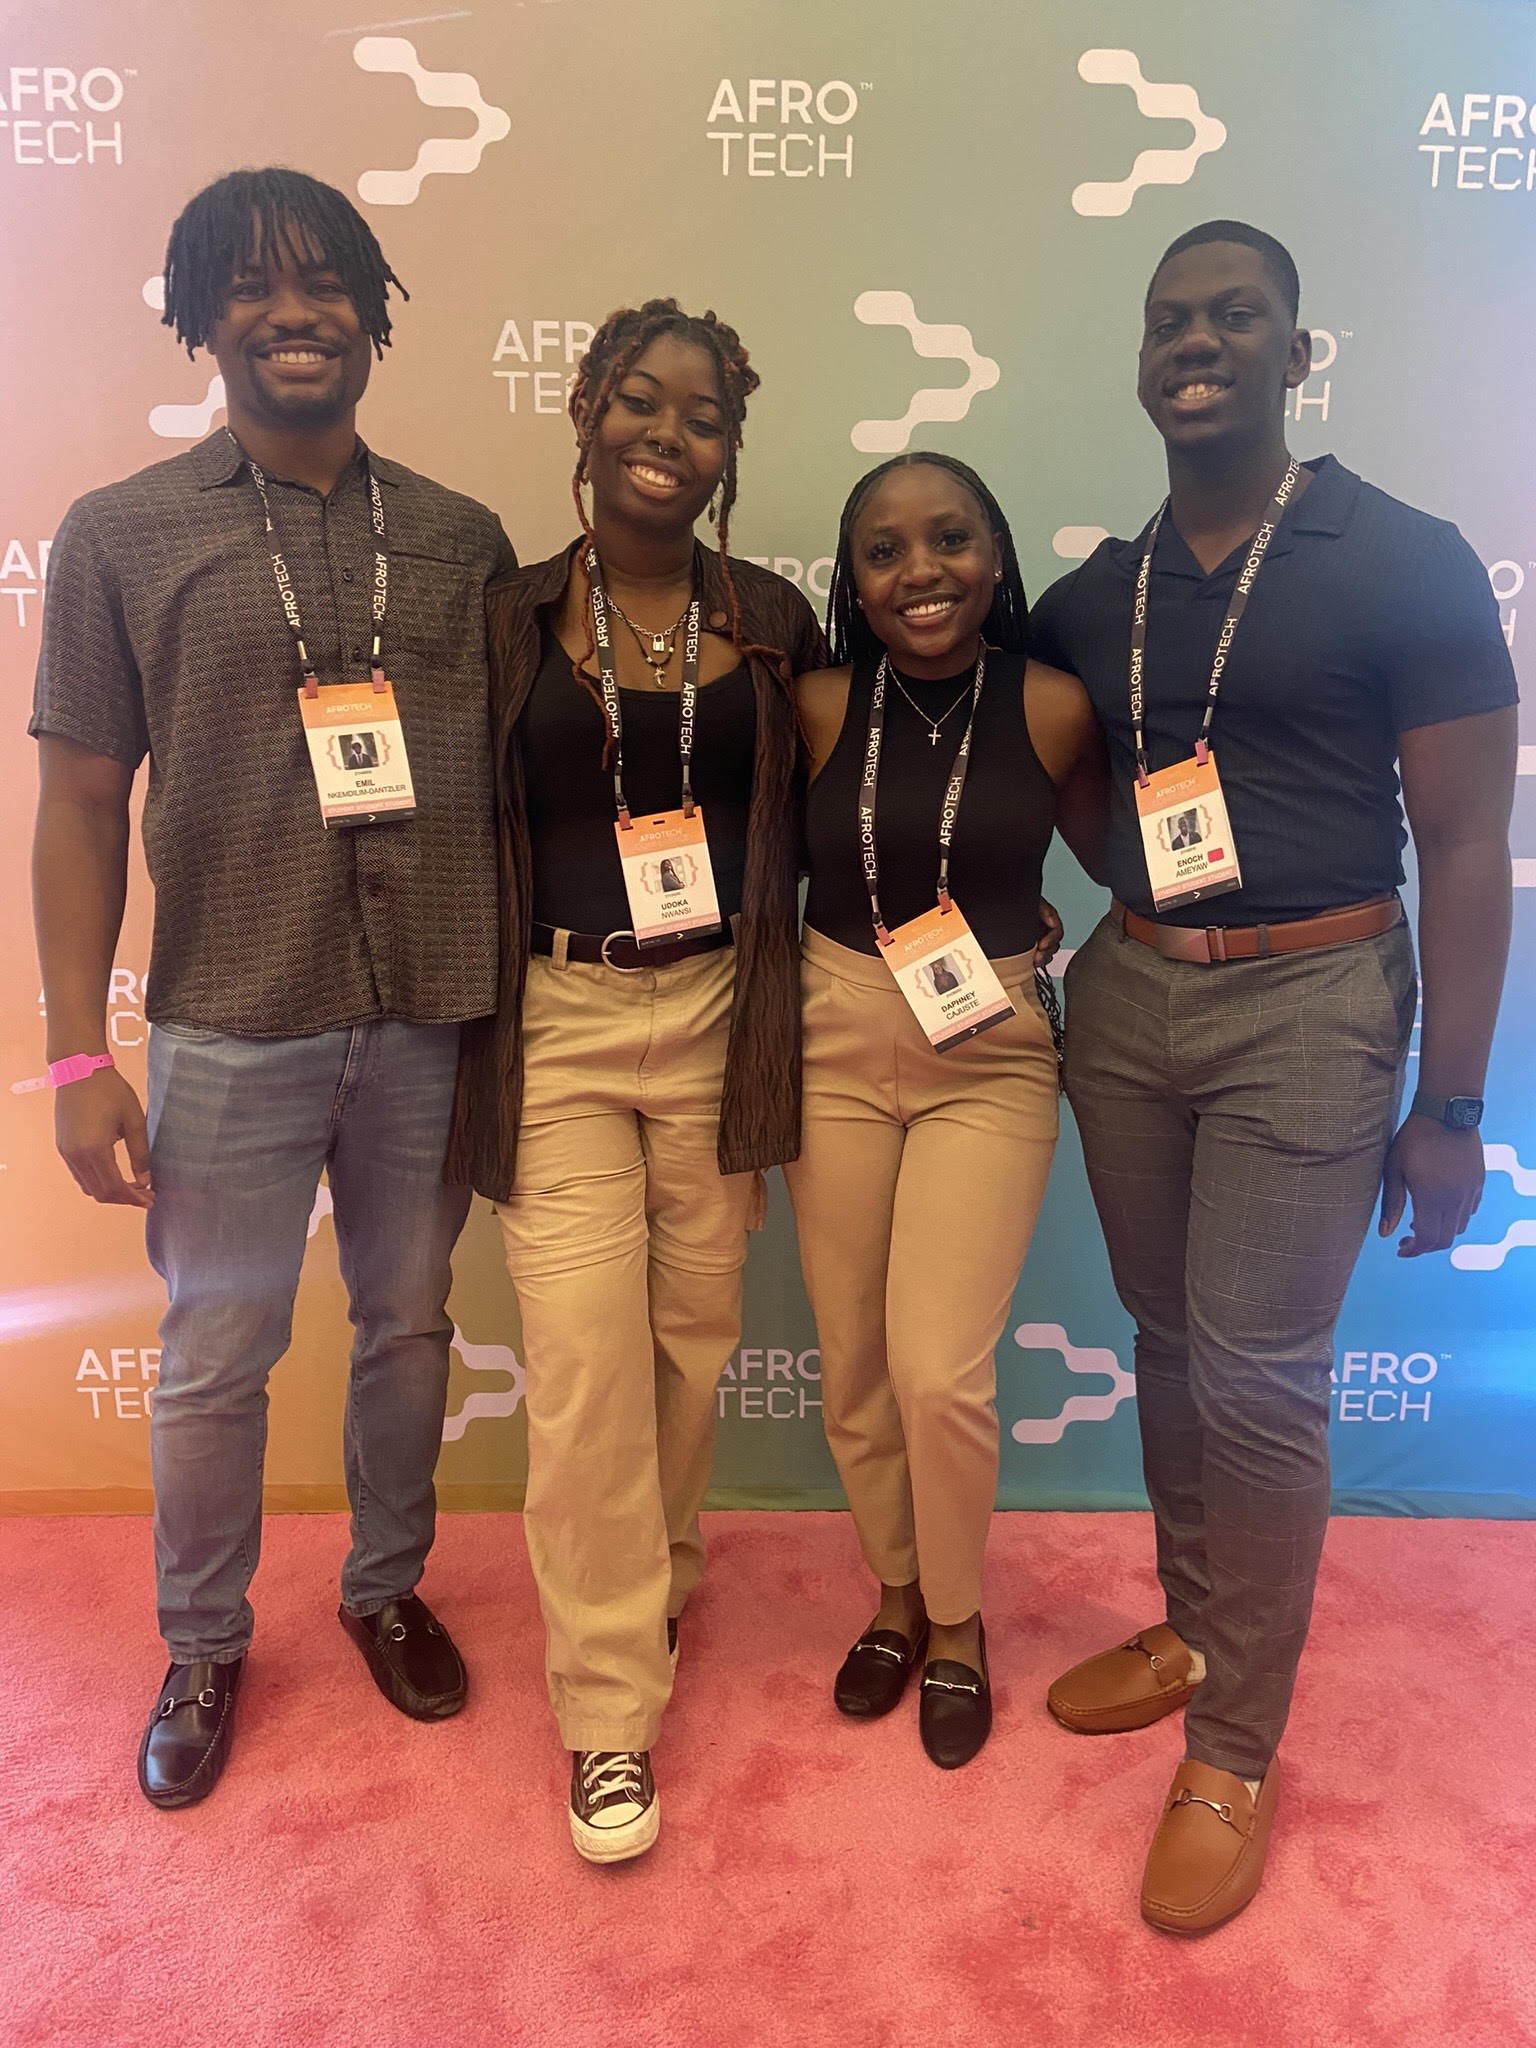 CSE sponsors students to attend AfroTech 2022 Conference